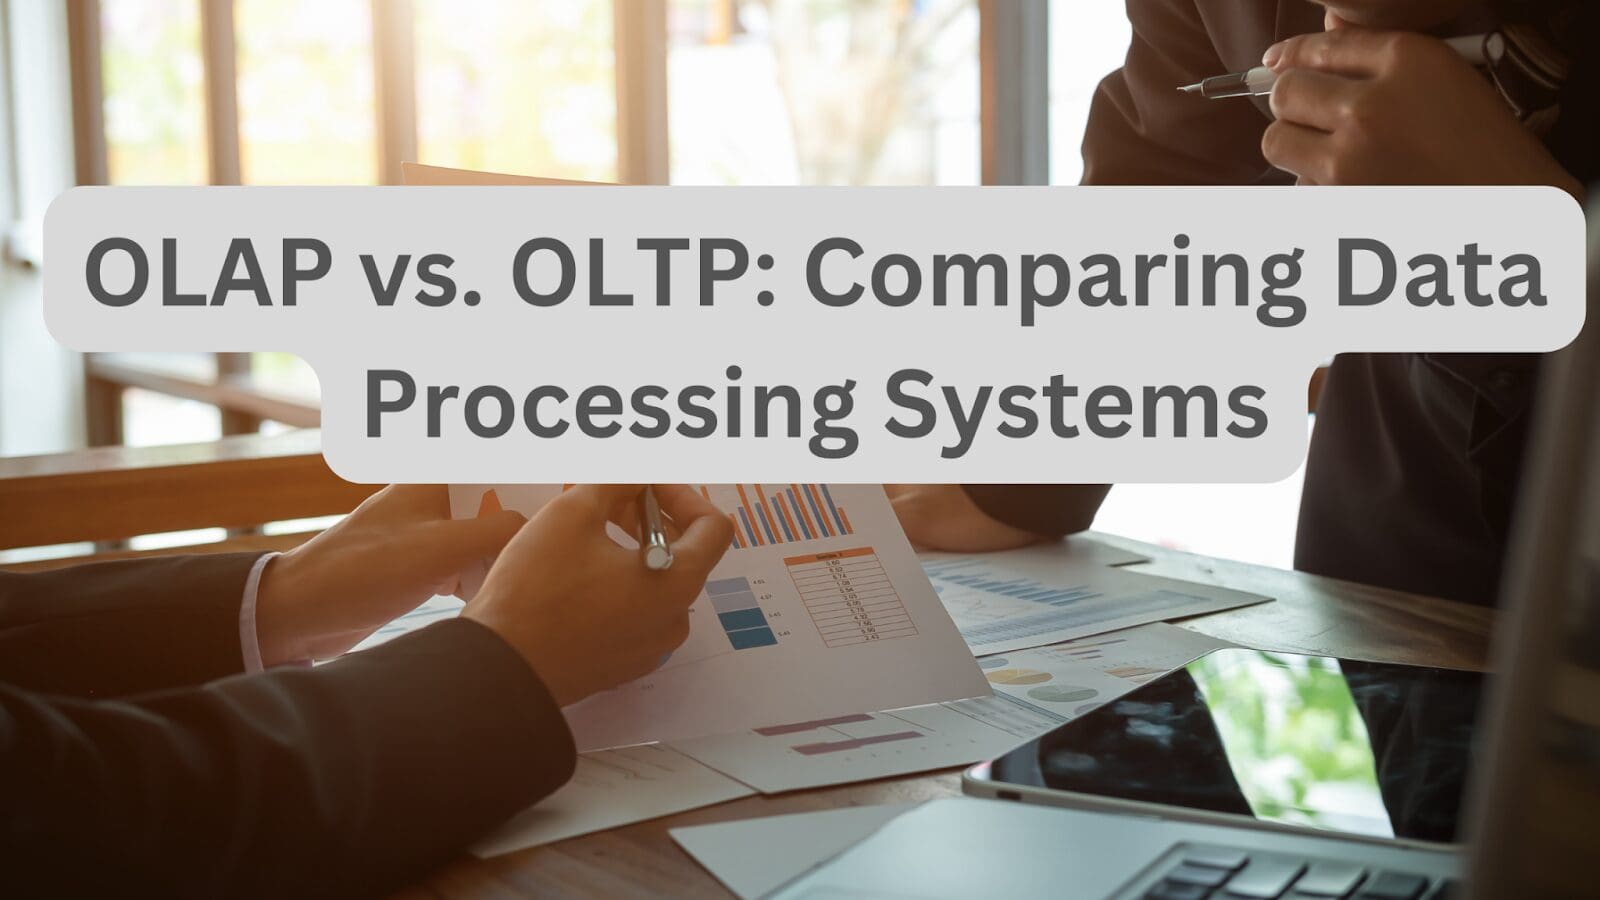 OLAP vs. OLTP: A Comparative Analysis of Data Processing Systems